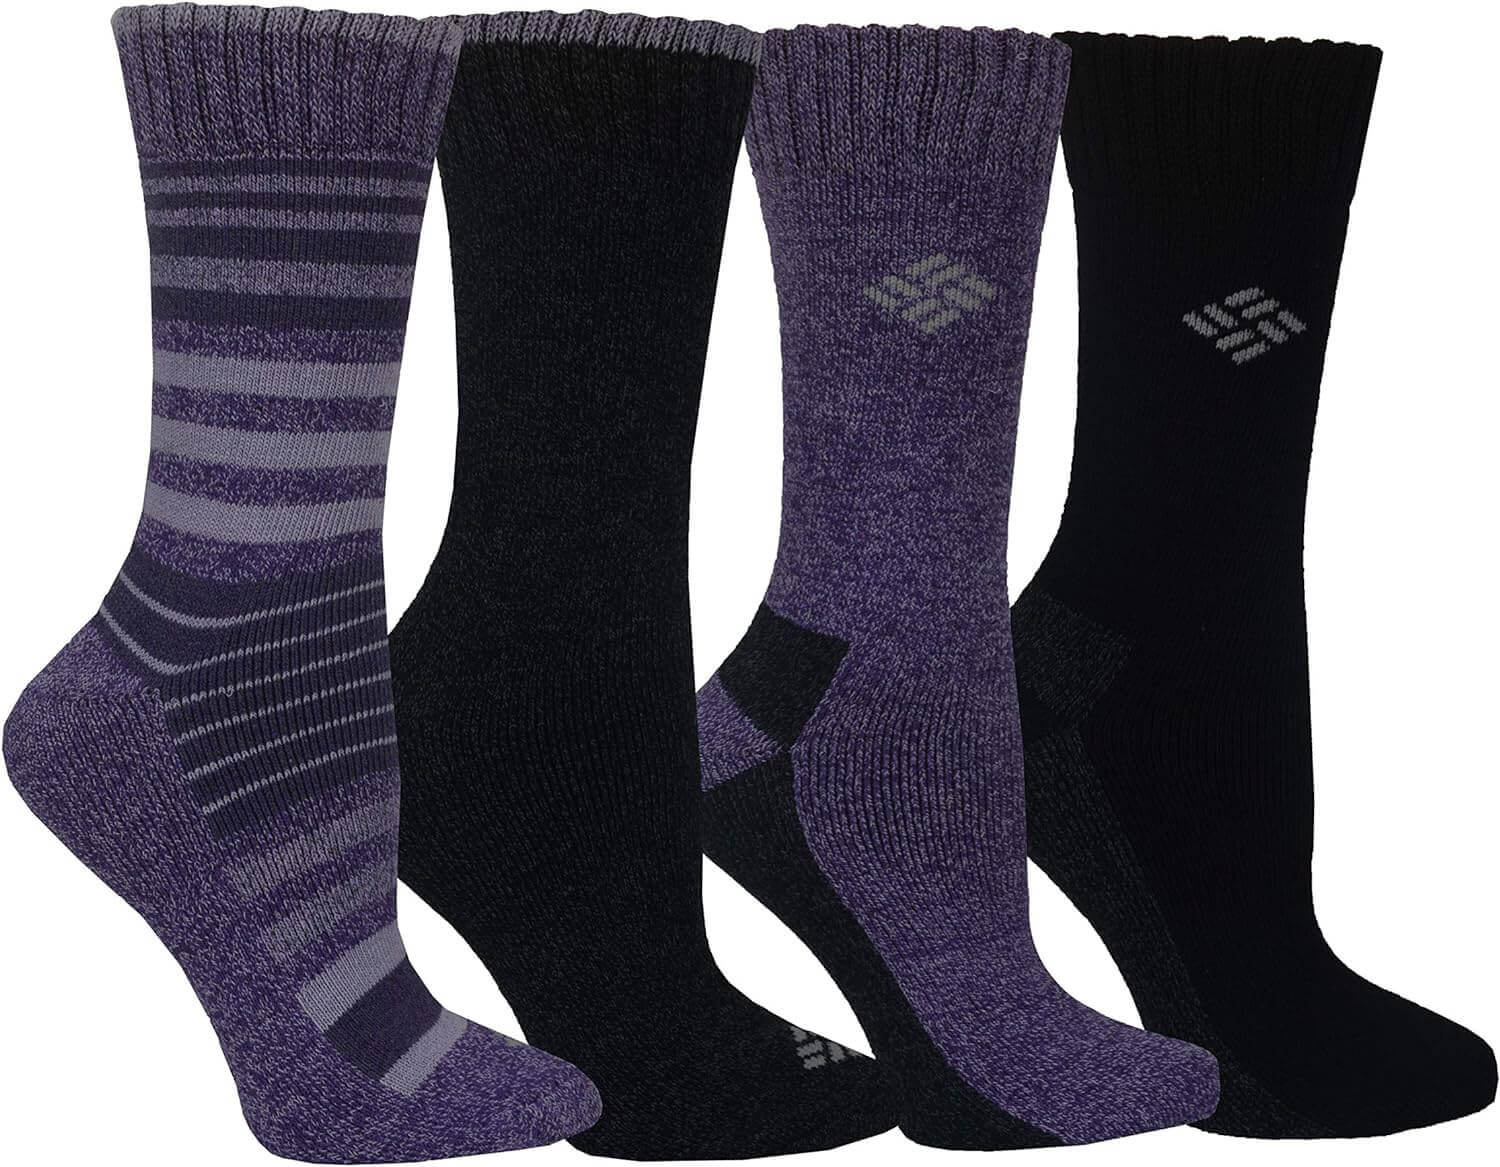 Shop The Latest >Columbia Women's 4 Pack Moisture Control Crew Socks > *Only $29.77*> From The Top Brand > *Columbial* > Shop Now and Get Free Shipping On Orders Over $45.00 >*Shop Earth Foot*